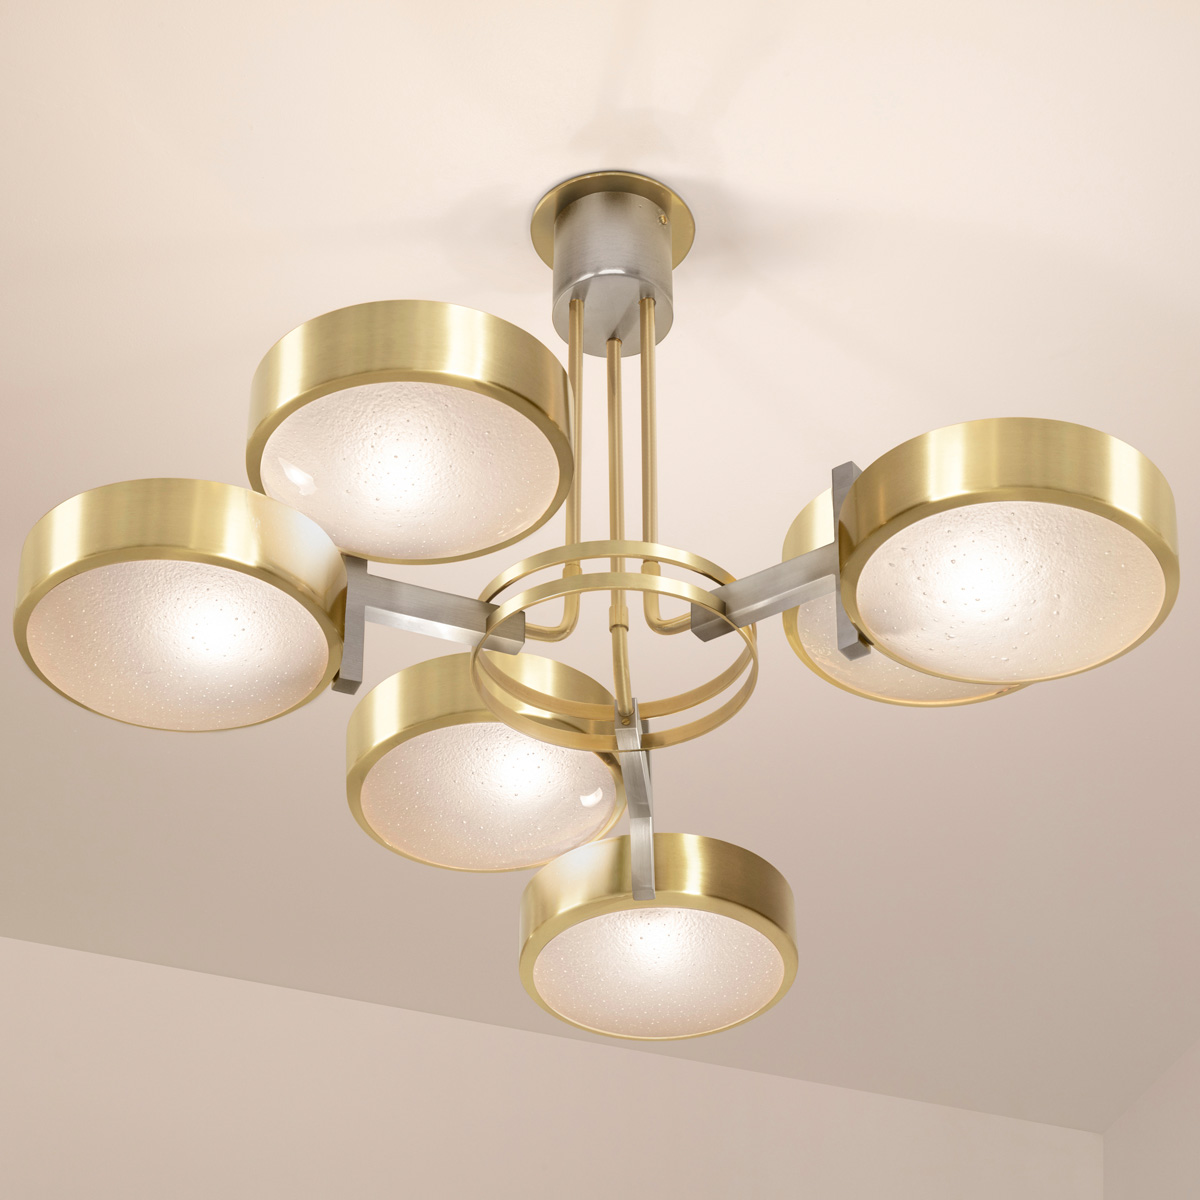 Eclissi ceiling light by Gaspare Asaro